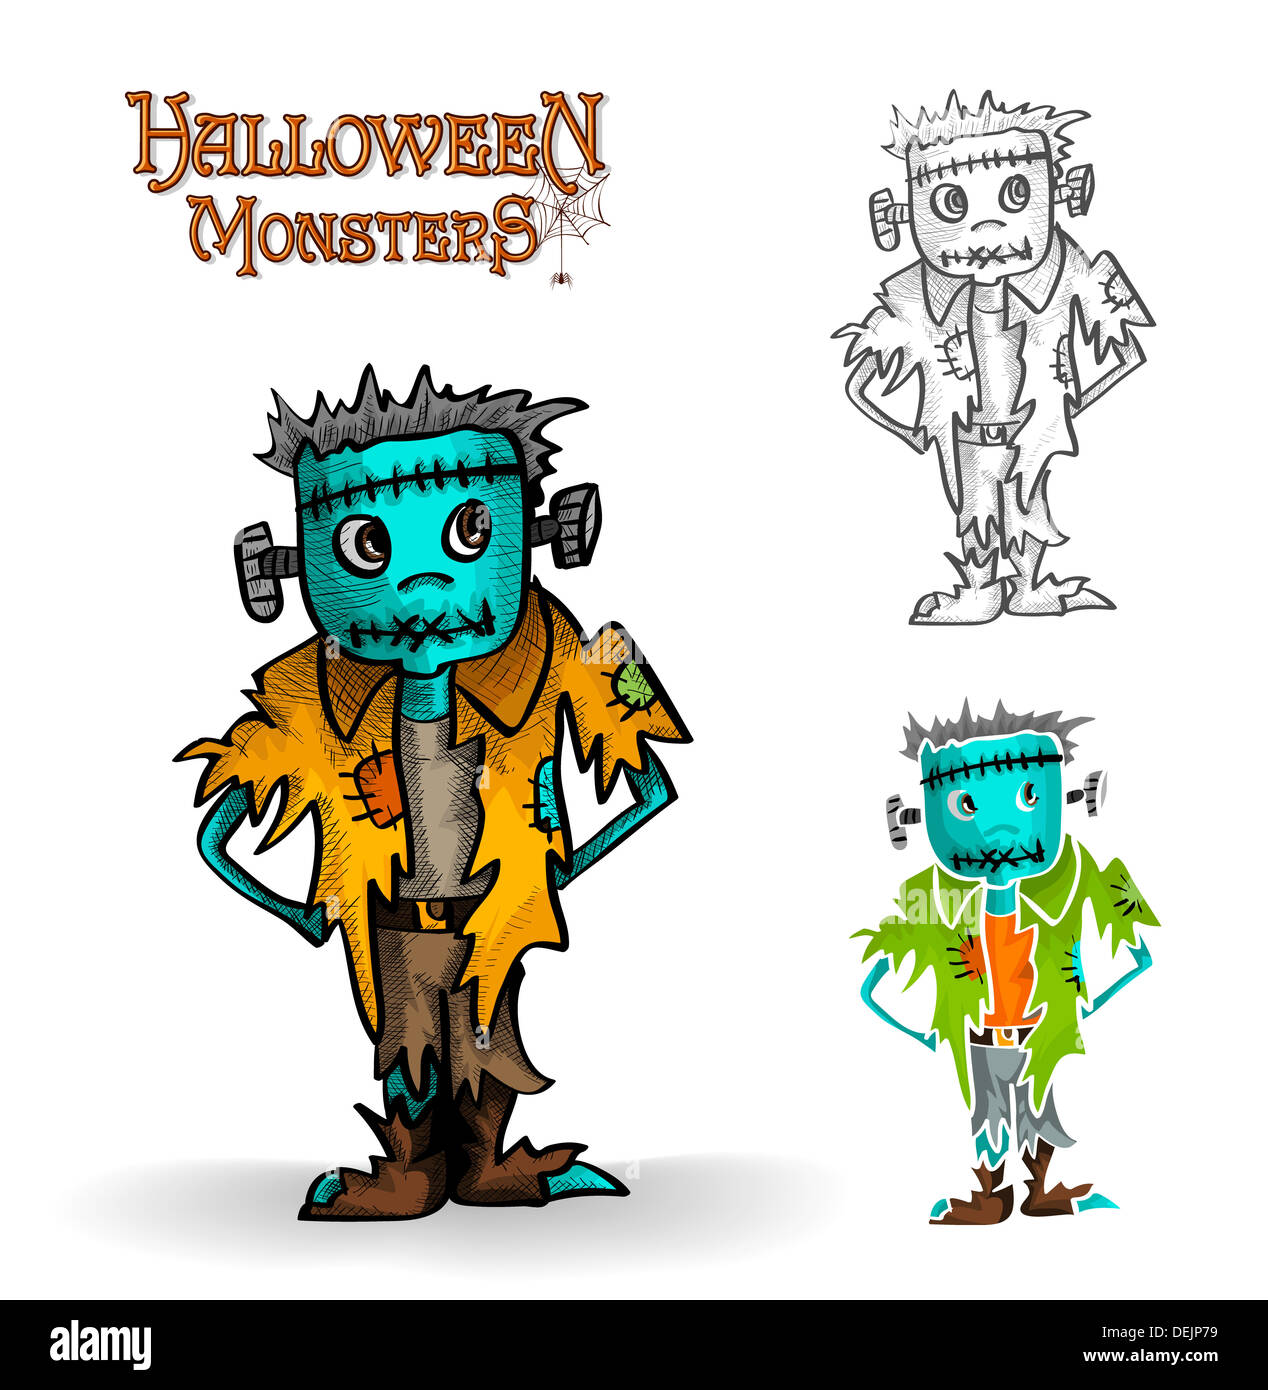 Halloween monster spooky young zombies set illustration. EPS10 Vector file organized in layers for easy editing. Stock Photo